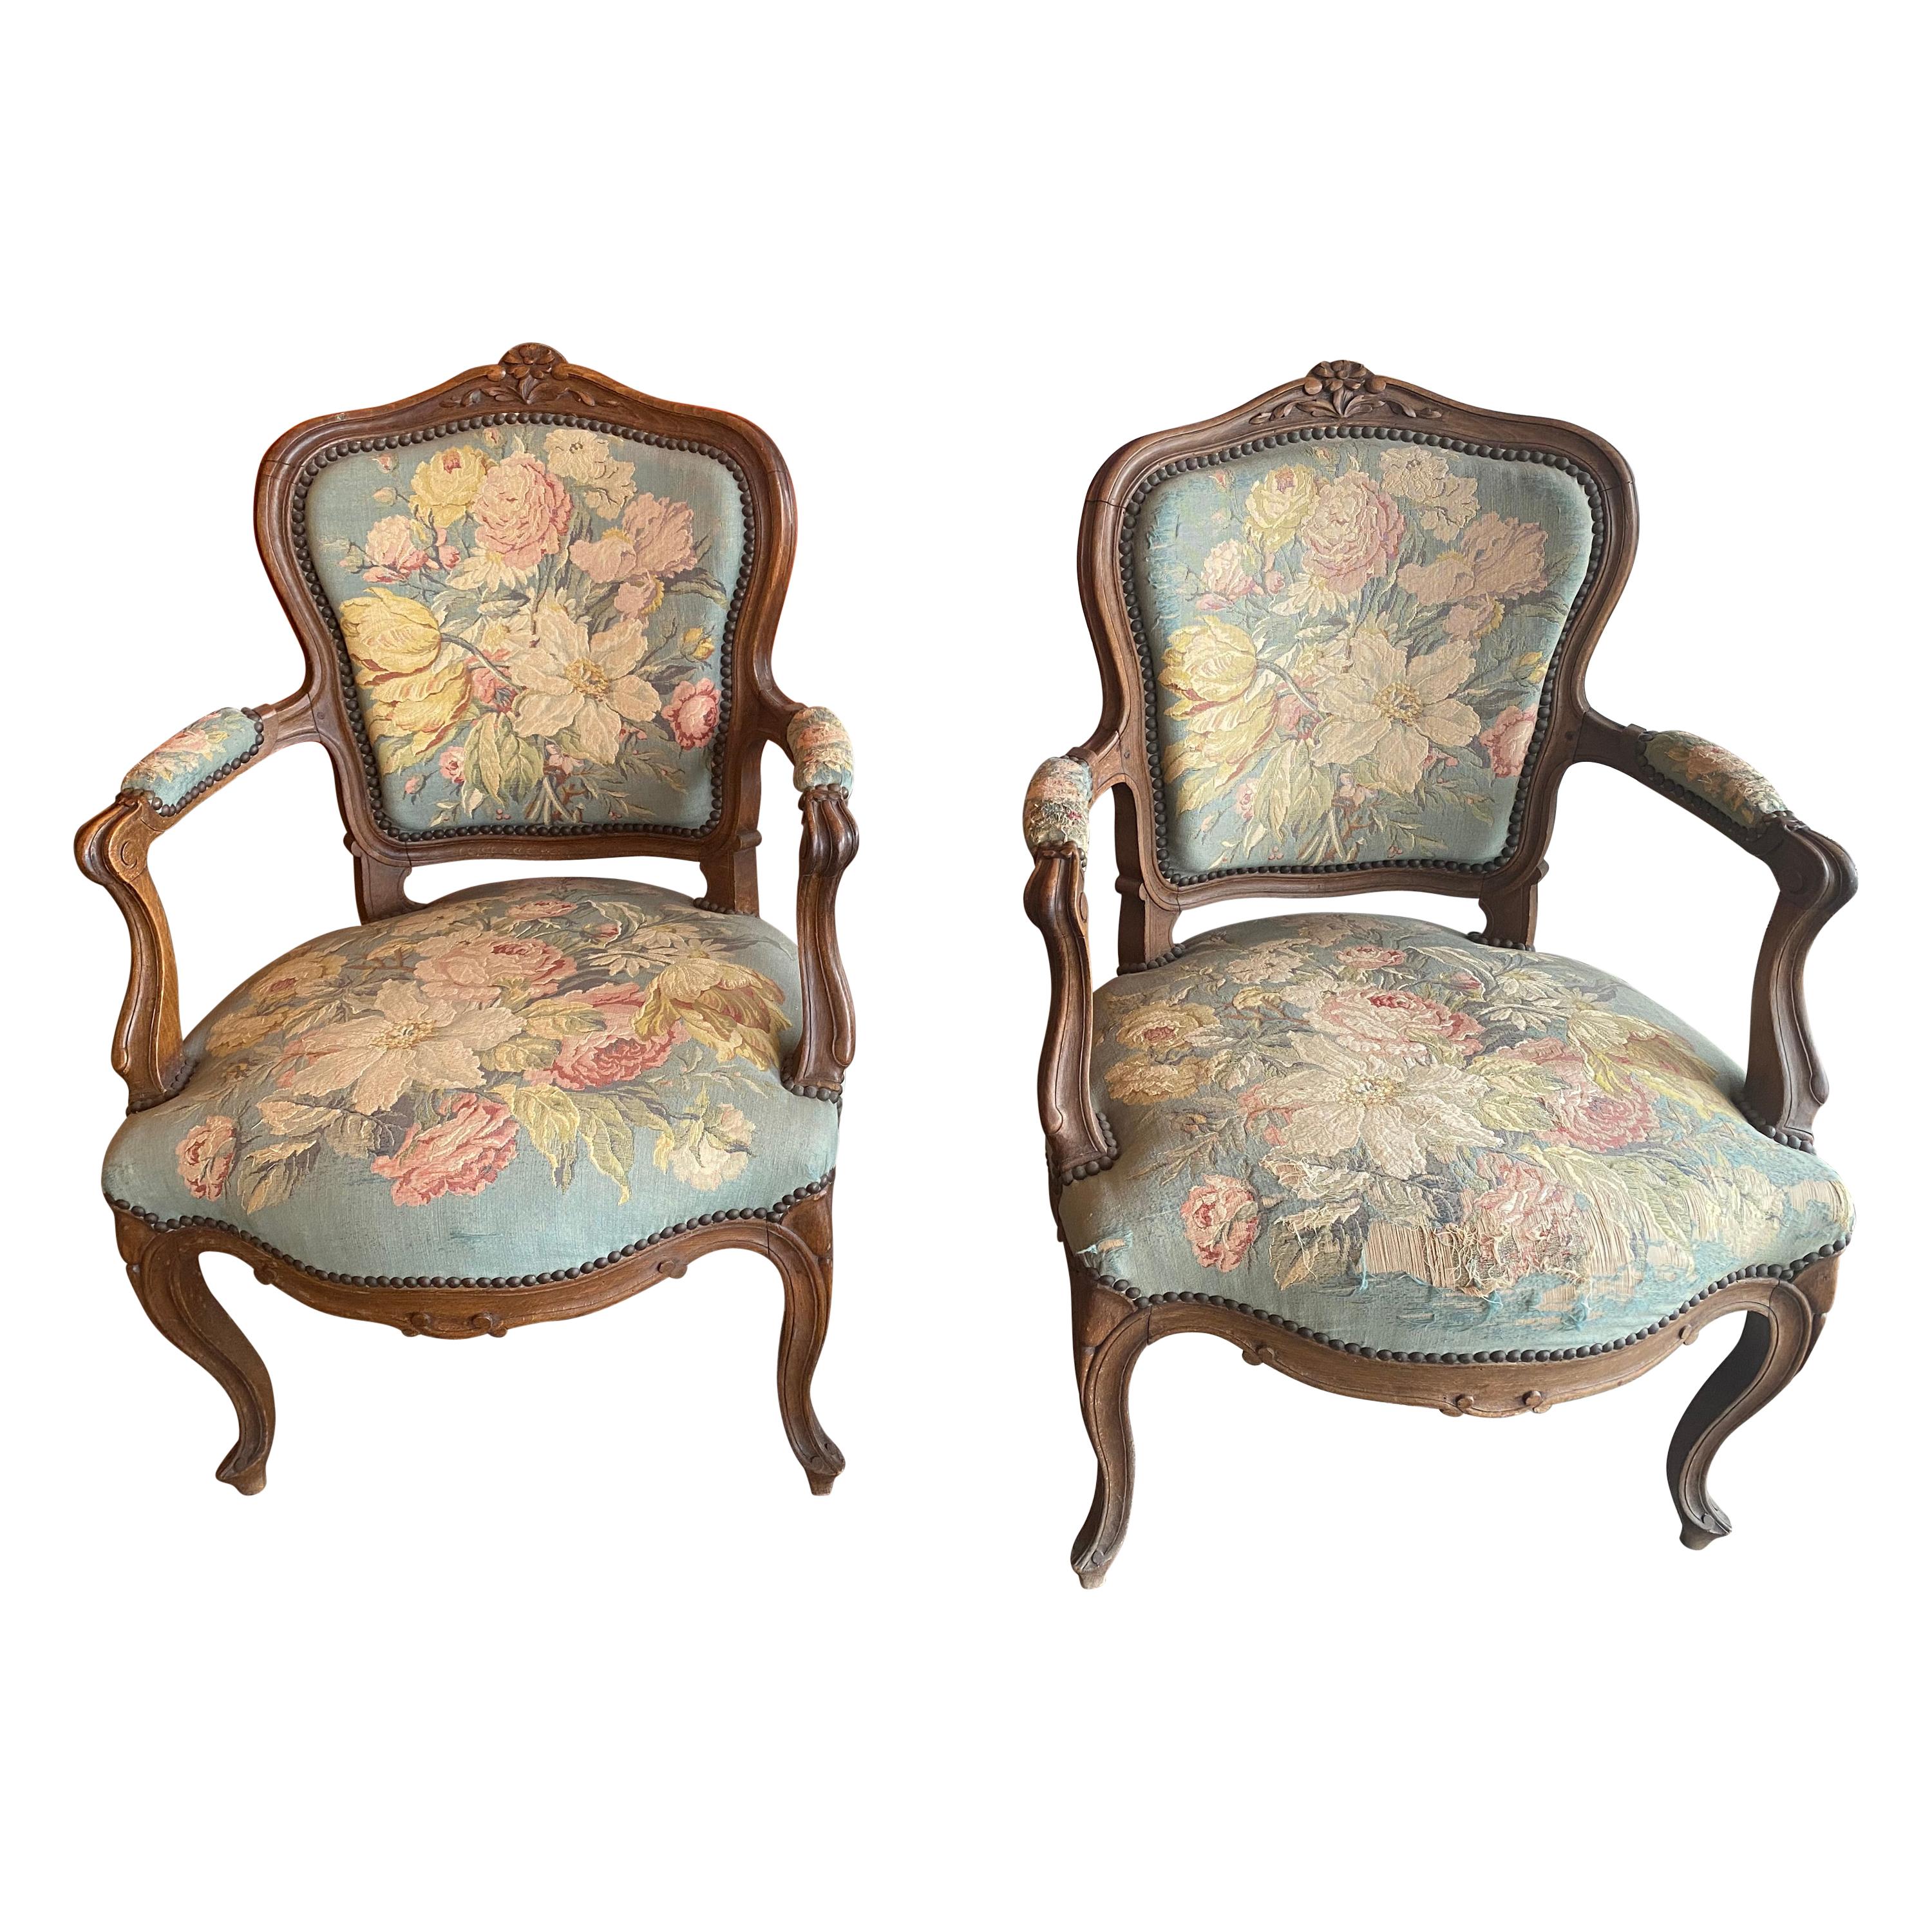 Upholstery Pair of Chairs